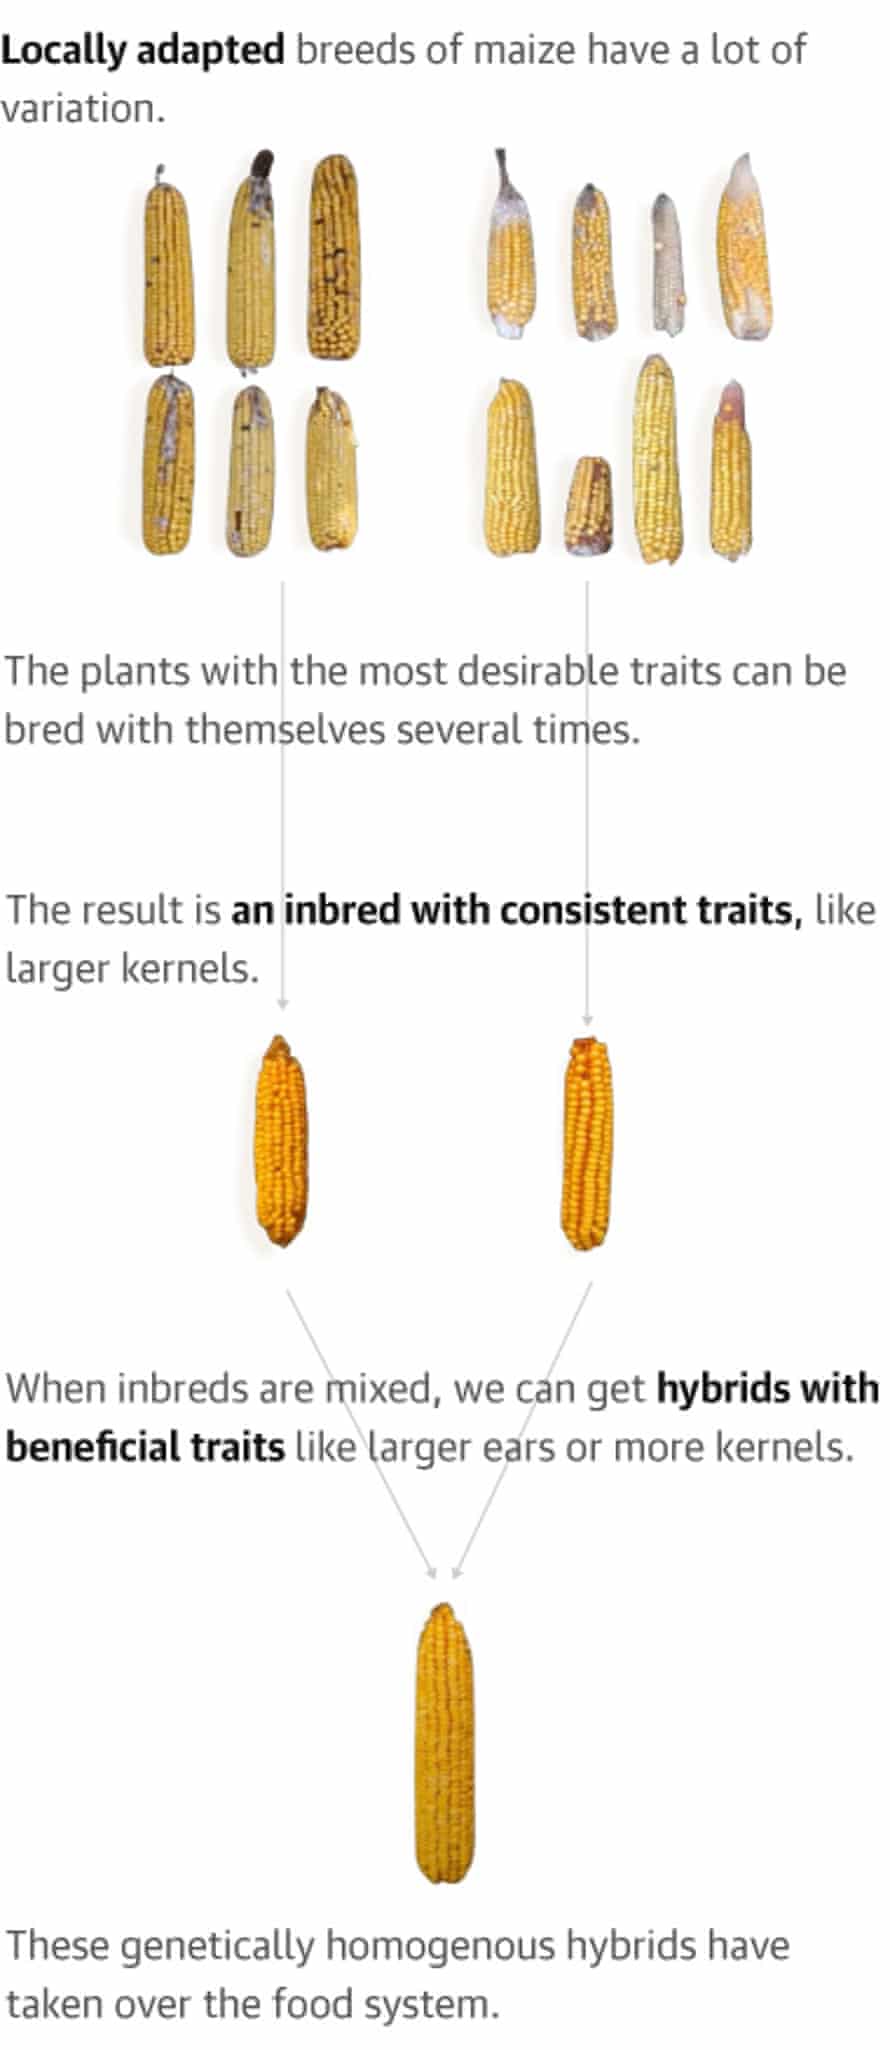 A chart shows a tree graphic of ears of corn being bred and improving in quality at each level with the words: Locally adapted breeds of maize have a lot of variation.  The plants with the most desirable traits can be bred with themselves several times.  The result is an inbred with consistent traits, like larger kernels.  When inbreds are mixed, we can get hybrids with beneficial traits like larger ears or more kernels.  These genetically homogeneous hybrids have taken over the food system.